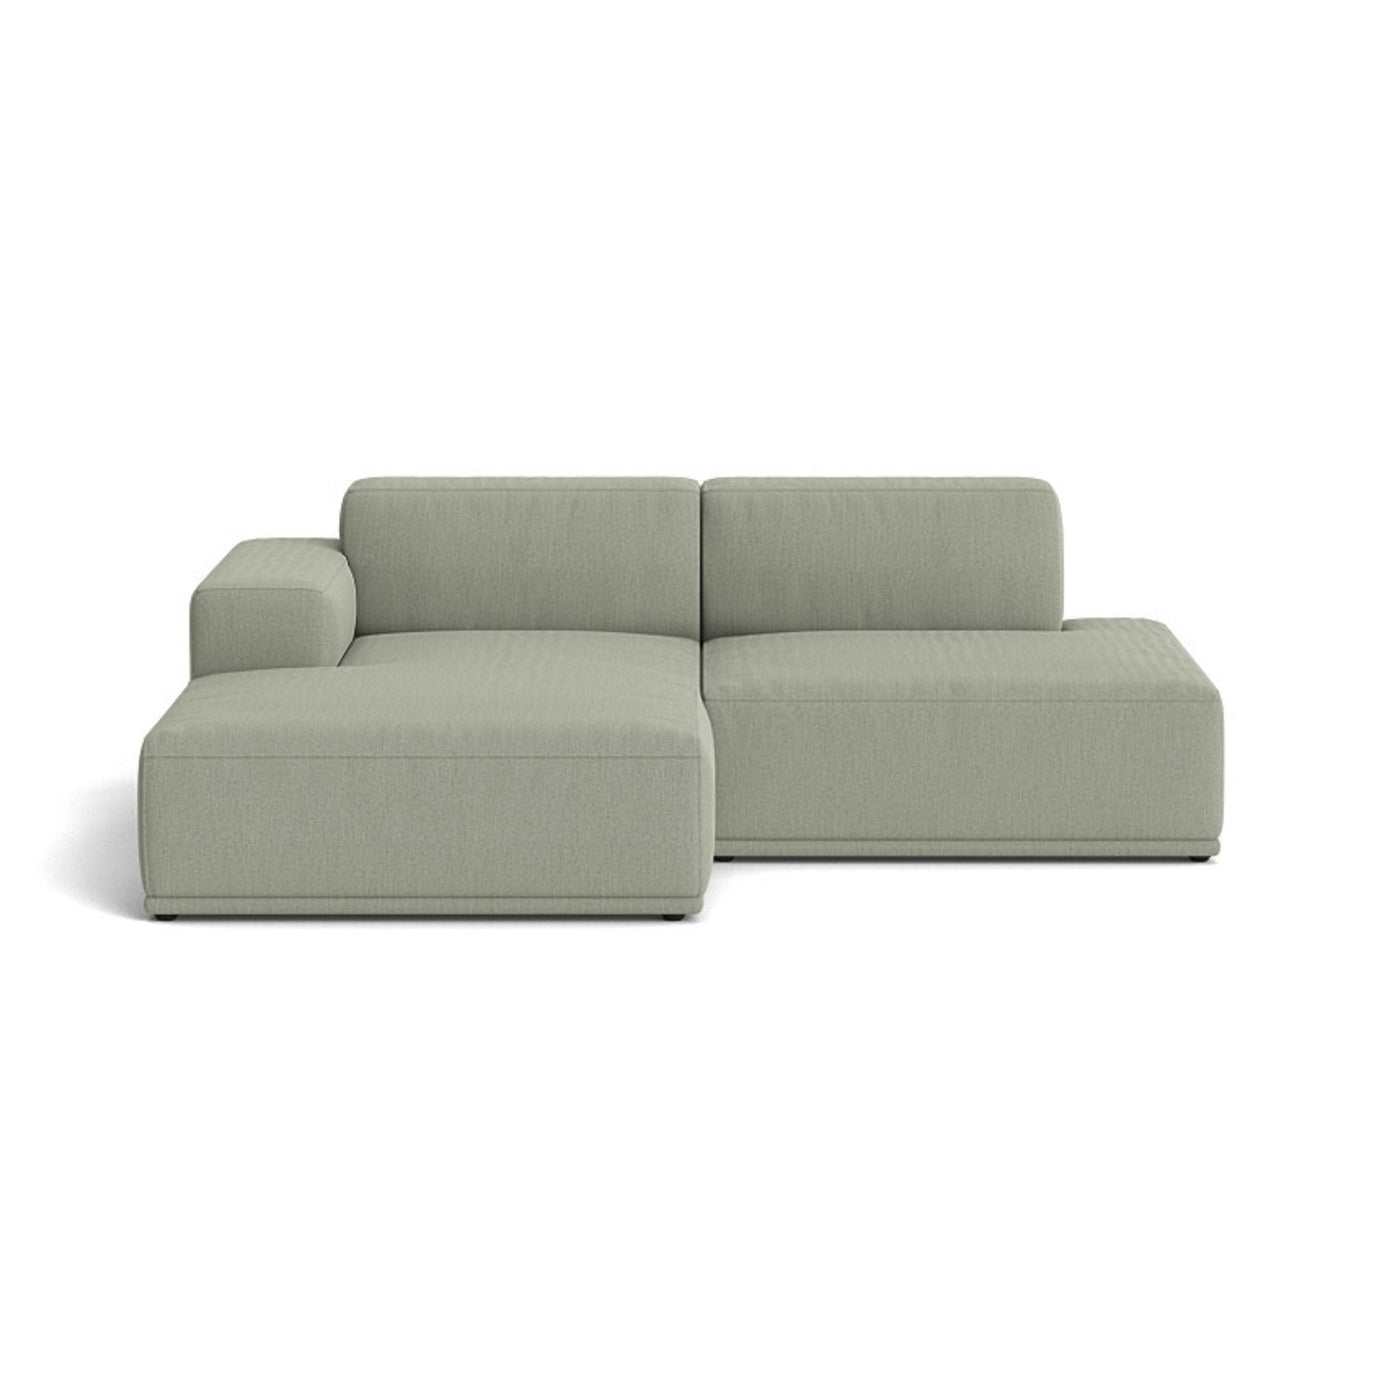 Muuto Connect Soft Modular 2 Seater Sofa, configuration 3. made-to-order from someday designs. #colour_re-wool-408